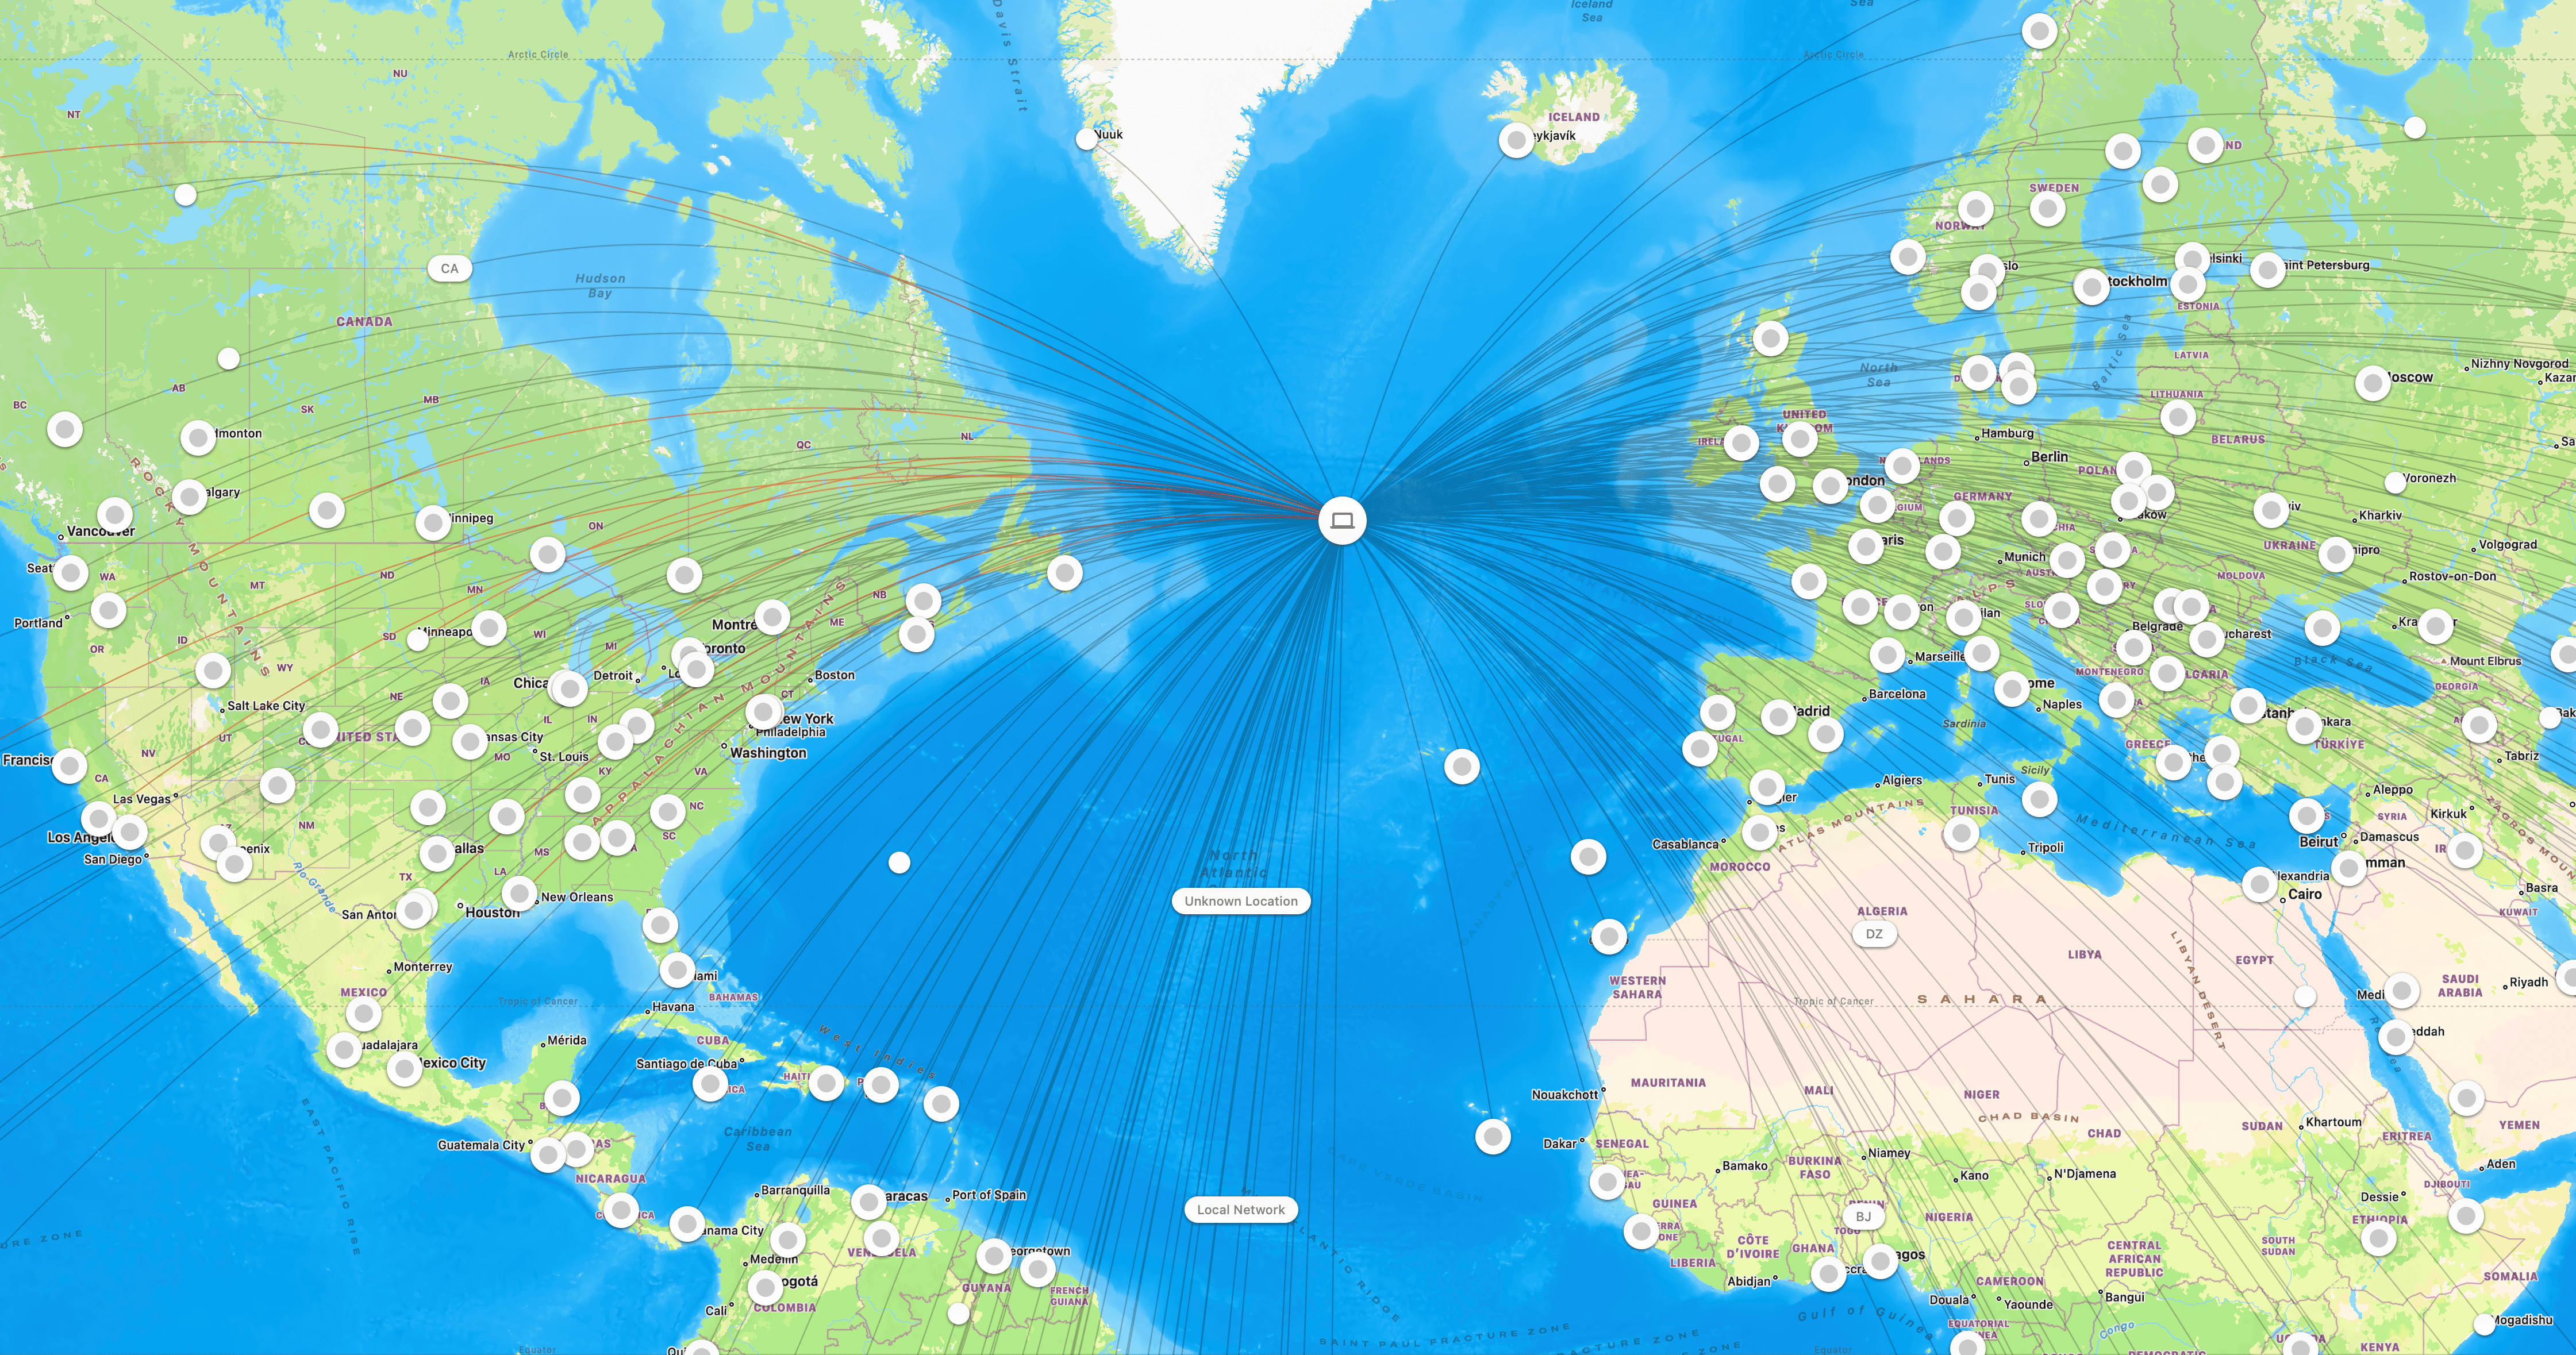 A screenshot of the LittleSnitch map view and a world full of connections